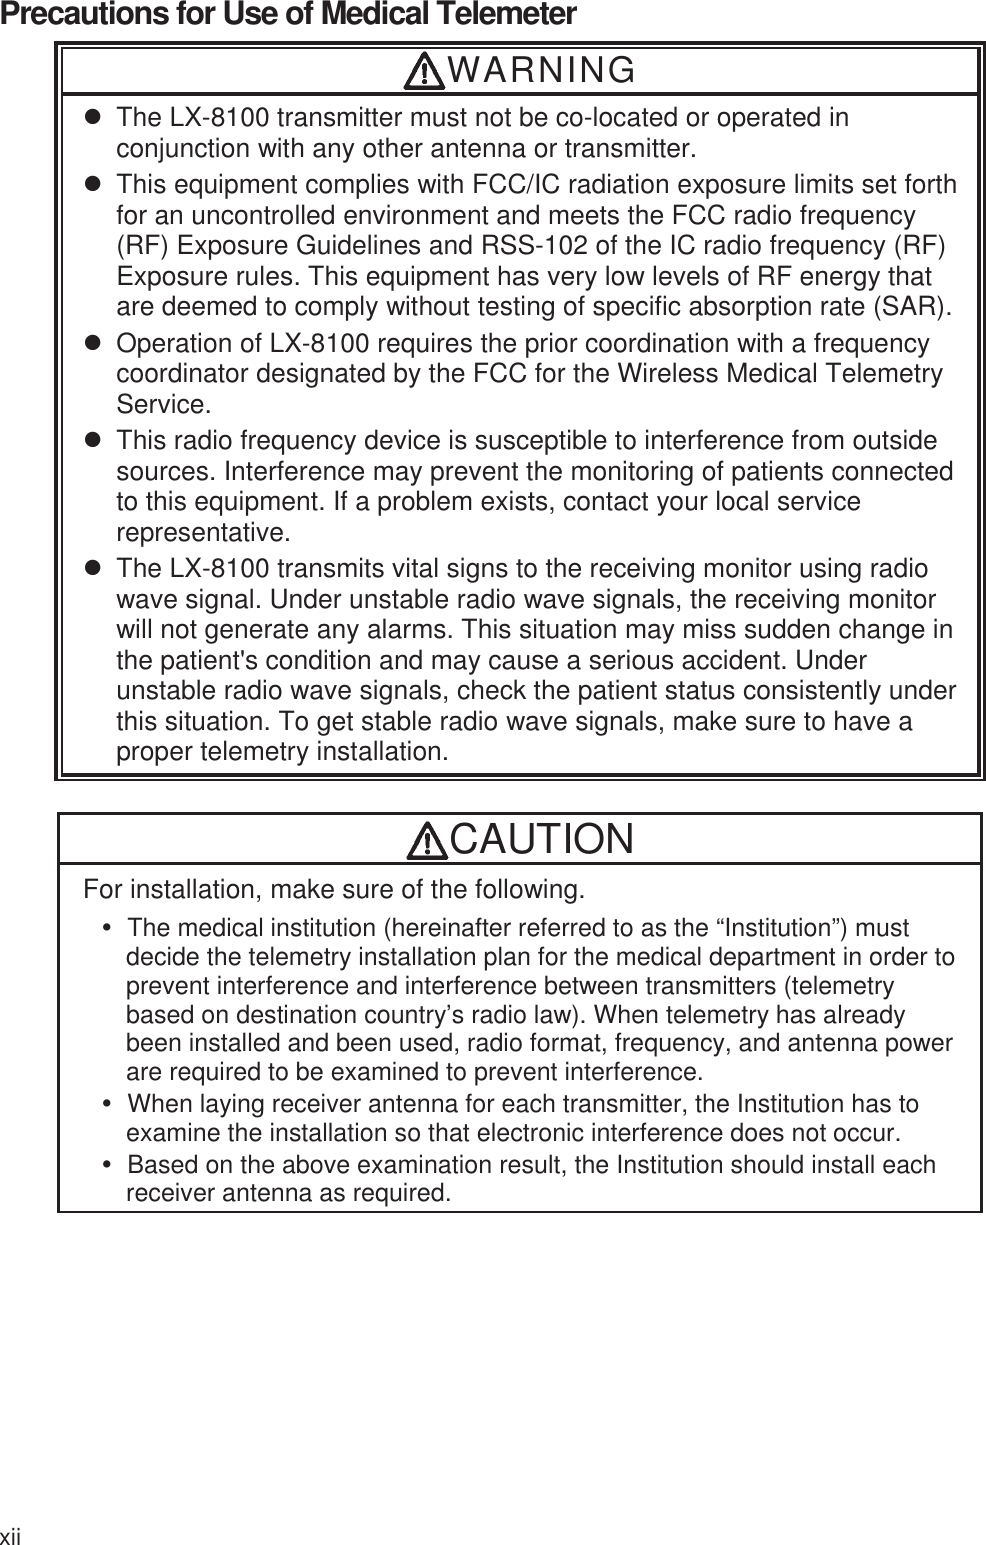 xii  Precautions for Use of Medical Telemeter WARNING z  The LX-8100 transmitter must not be co-located or operated in conjunction with any other antenna or transmitter. z  This equipment complies with FCC/IC radiation exposure limits set forth for an uncontrolled environment and meets the FCC radio frequency (RF) Exposure Guidelines and RSS-102 of the IC radio frequency (RF) Exposure rules. This equipment has very low levels of RF energy that are deemed to comply without testing of specific absorption rate (SAR).z  Operation of LX-8100 requires the prior coordination with a frequency coordinator designated by the FCC for the Wireless Medical Telemetry Service.  z  This radio frequency device is susceptible to interference from outside sources. Interference may prevent the monitoring of patients connected to this equipment. If a problem exists, contact your local service representative. z  The LX-8100 transmits vital signs to the receiving monitor using radio wave signal. Under unstable radio wave signals, the receiving monitor will not generate any alarms. This situation may miss sudden change in the patient&apos;s condition and may cause a serious accident. Under unstable radio wave signals, check the patient status consistently under this situation. To get stable radio wave signals, make sure to have a proper telemetry installation.  CAUTION For installation, make sure of the following. y  The medical institution (hereinafter referred to as the “Institution”) must decide the telemetry installation plan for the medical department in order to prevent interference and interference between transmitters (telemetry based on destination country’s radio law). When telemetry has already been installed and been used, radio format, frequency, and antenna power are required to be examined to prevent interference. y  When laying receiver antenna for each transmitter, the Institution has to examine the installation so that electronic interference does not occur. y  Based on the above examination result, the Institution should install each receiver antenna as required. 